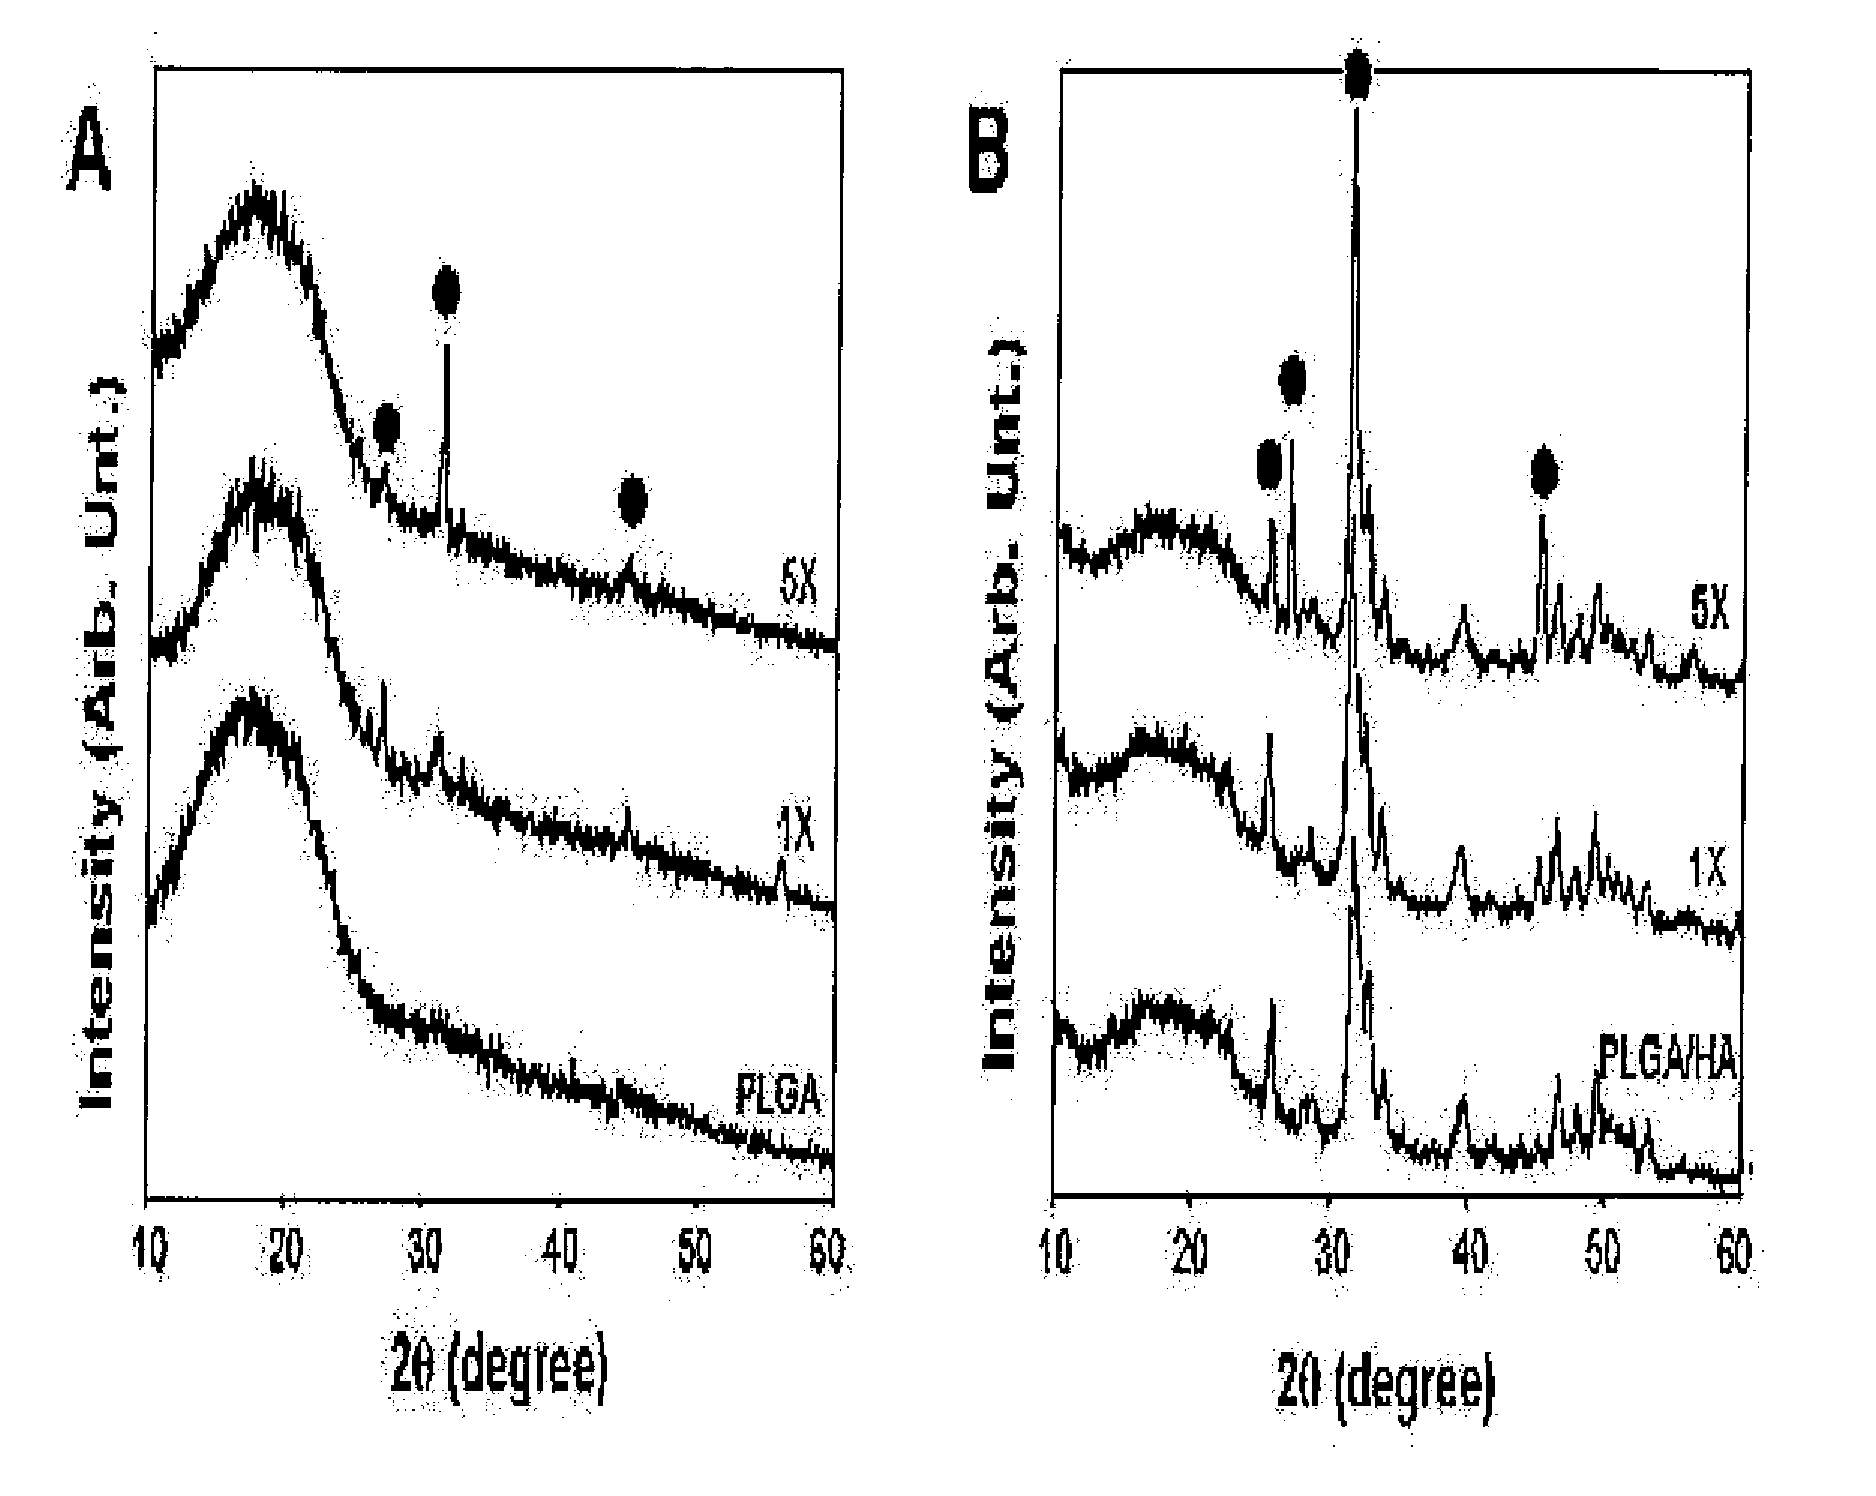 PLGA/Hydroxyapatite Composite Biomaterial and Method of Making the Same